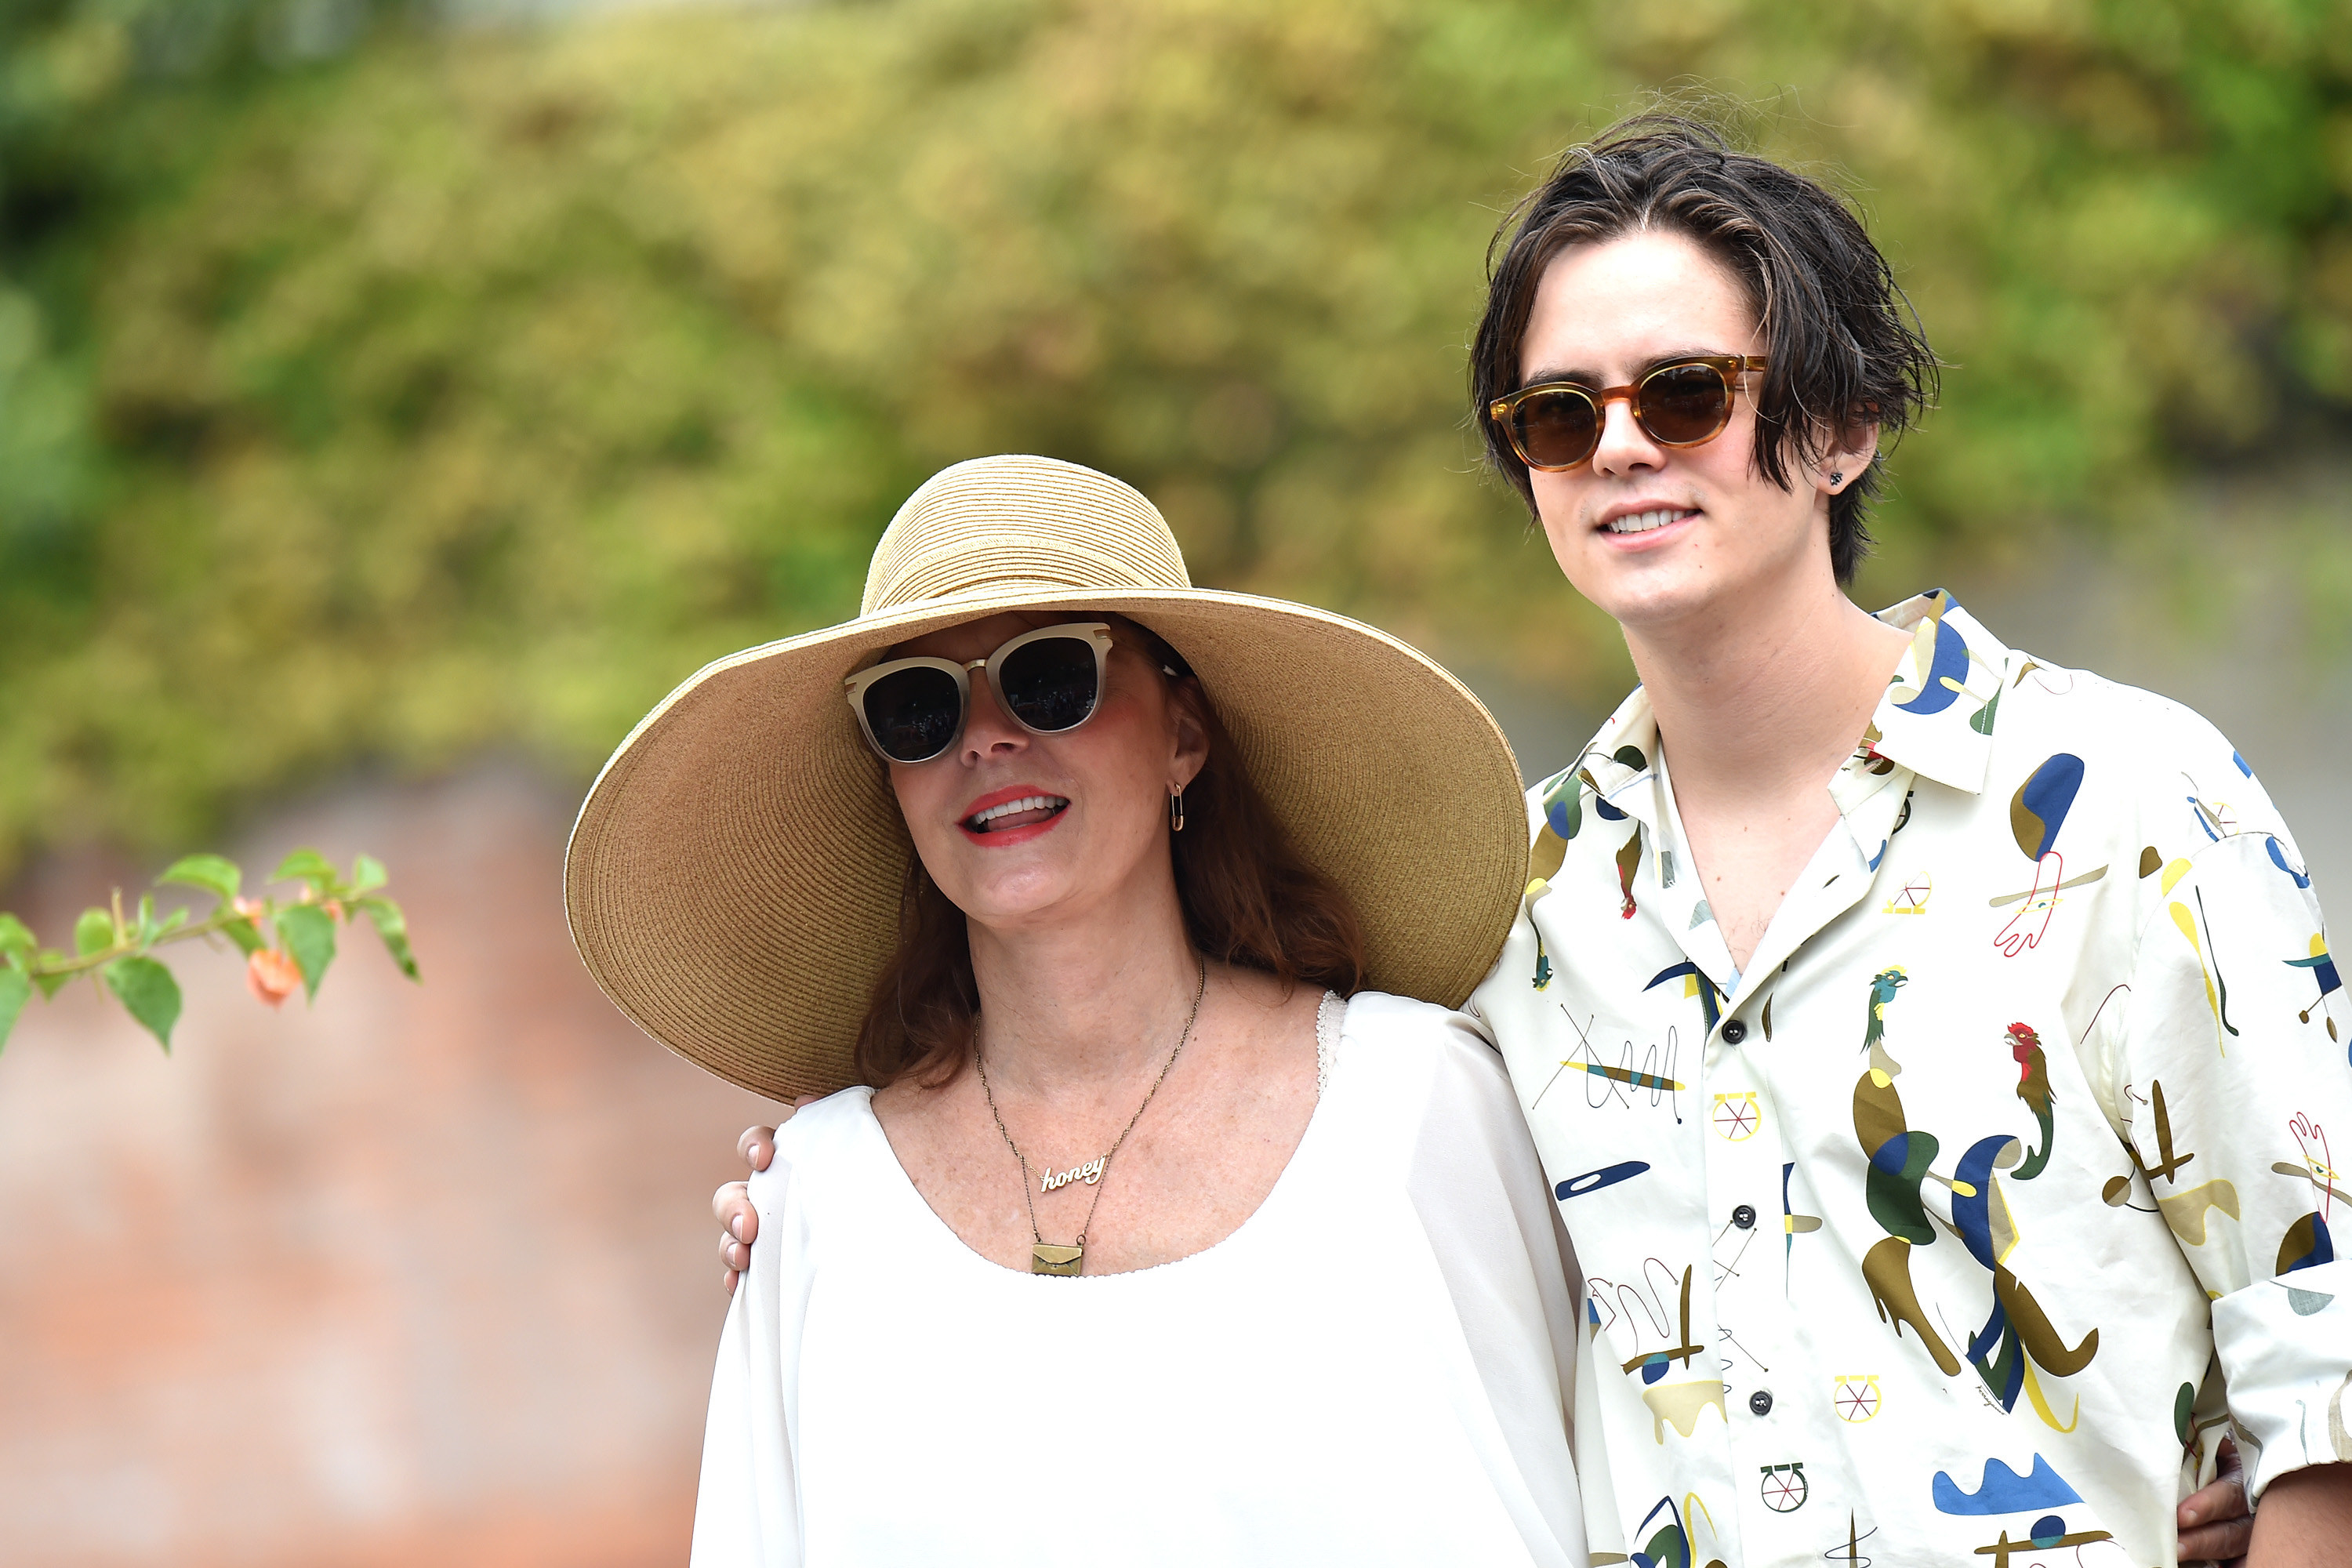 Susan in a wide-brimmed sun hat and Miles with his arm around her shoulders outdoors